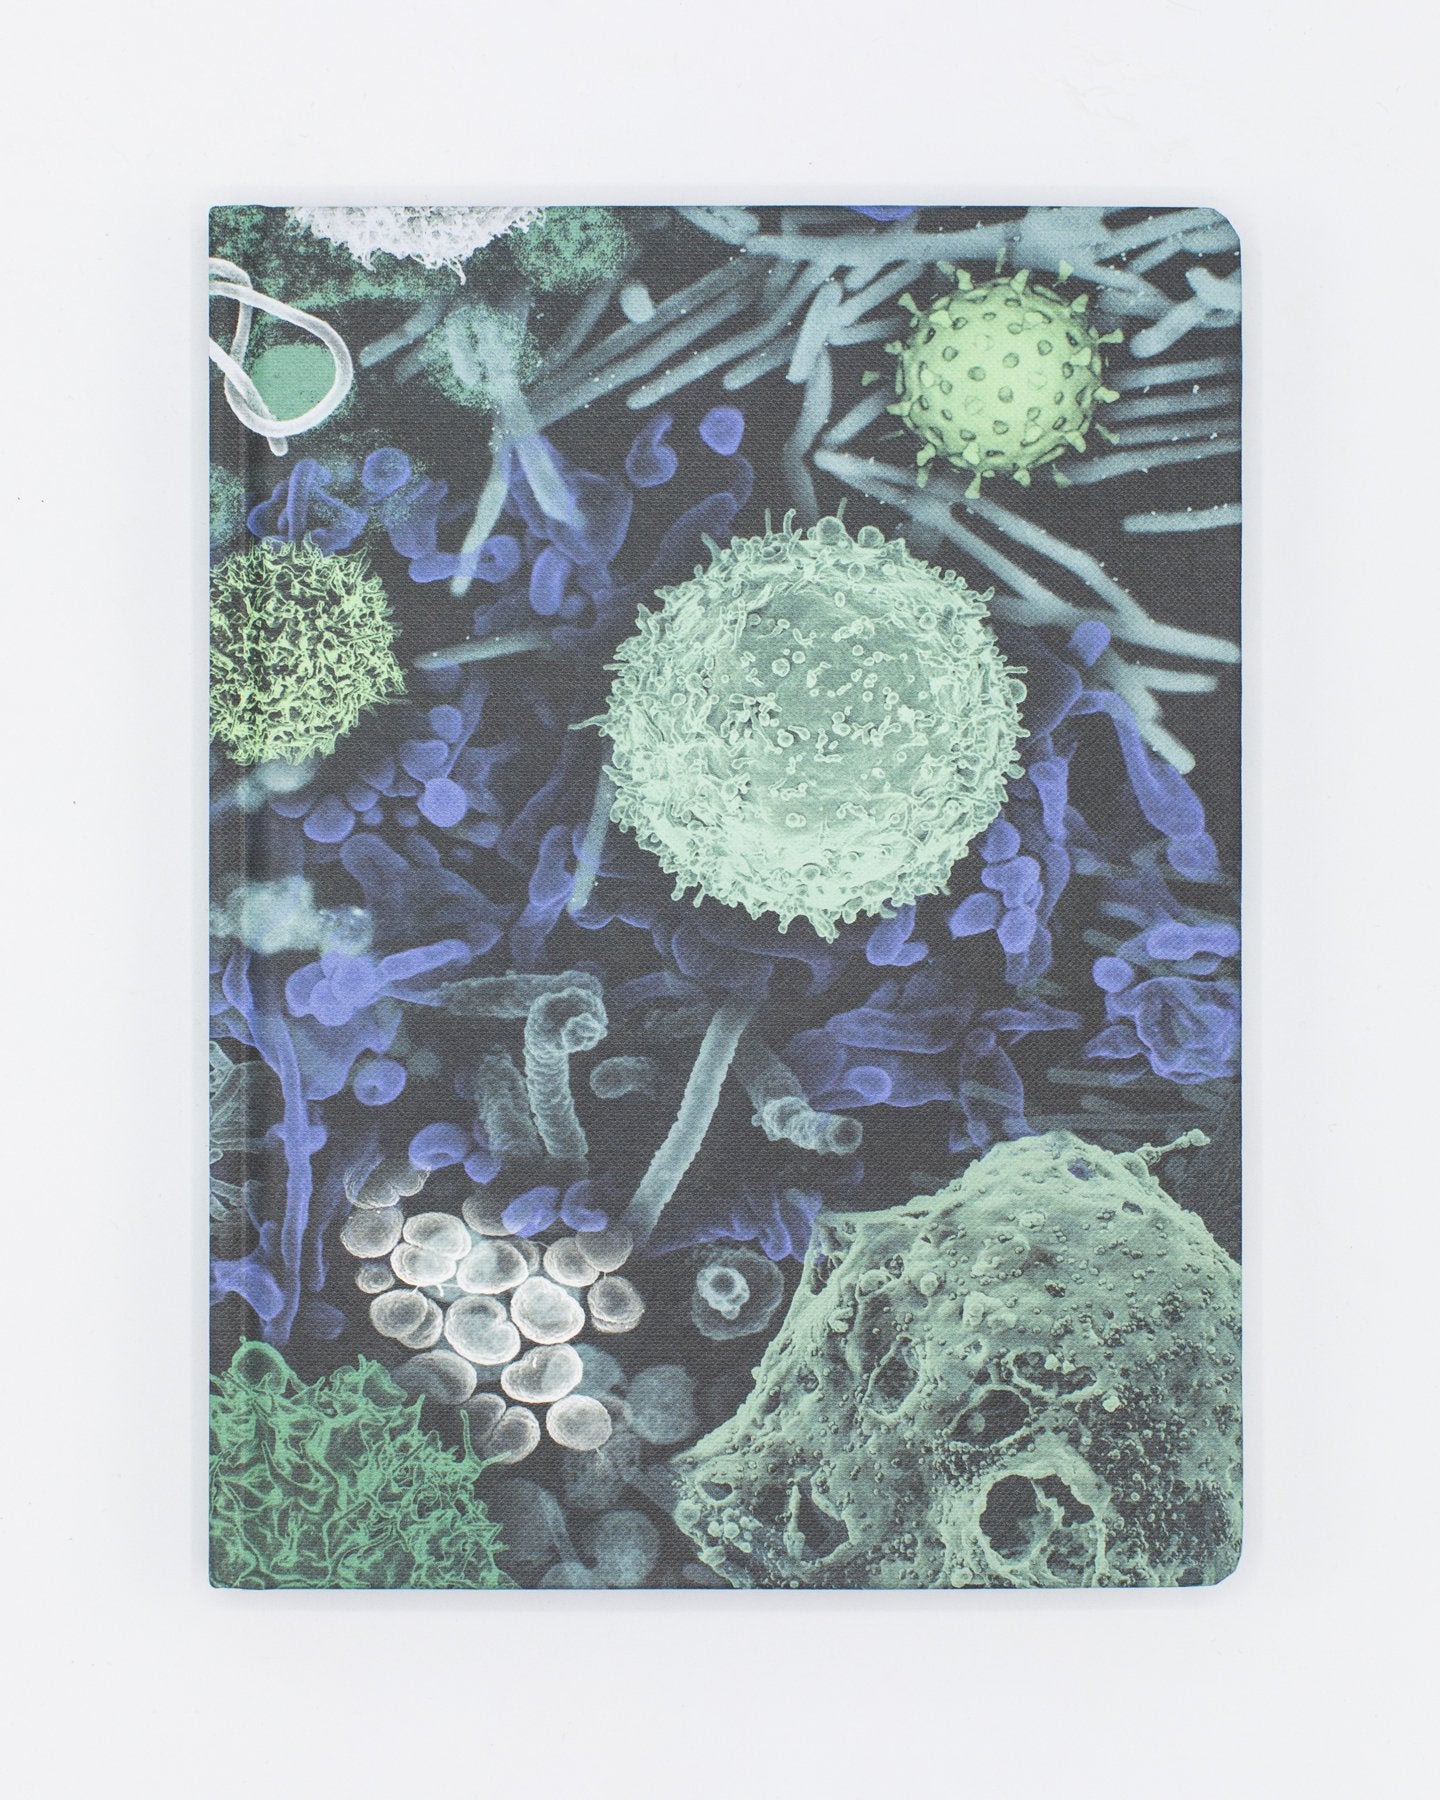 Infectious Disease Hardcover Notebook - Dot Grid